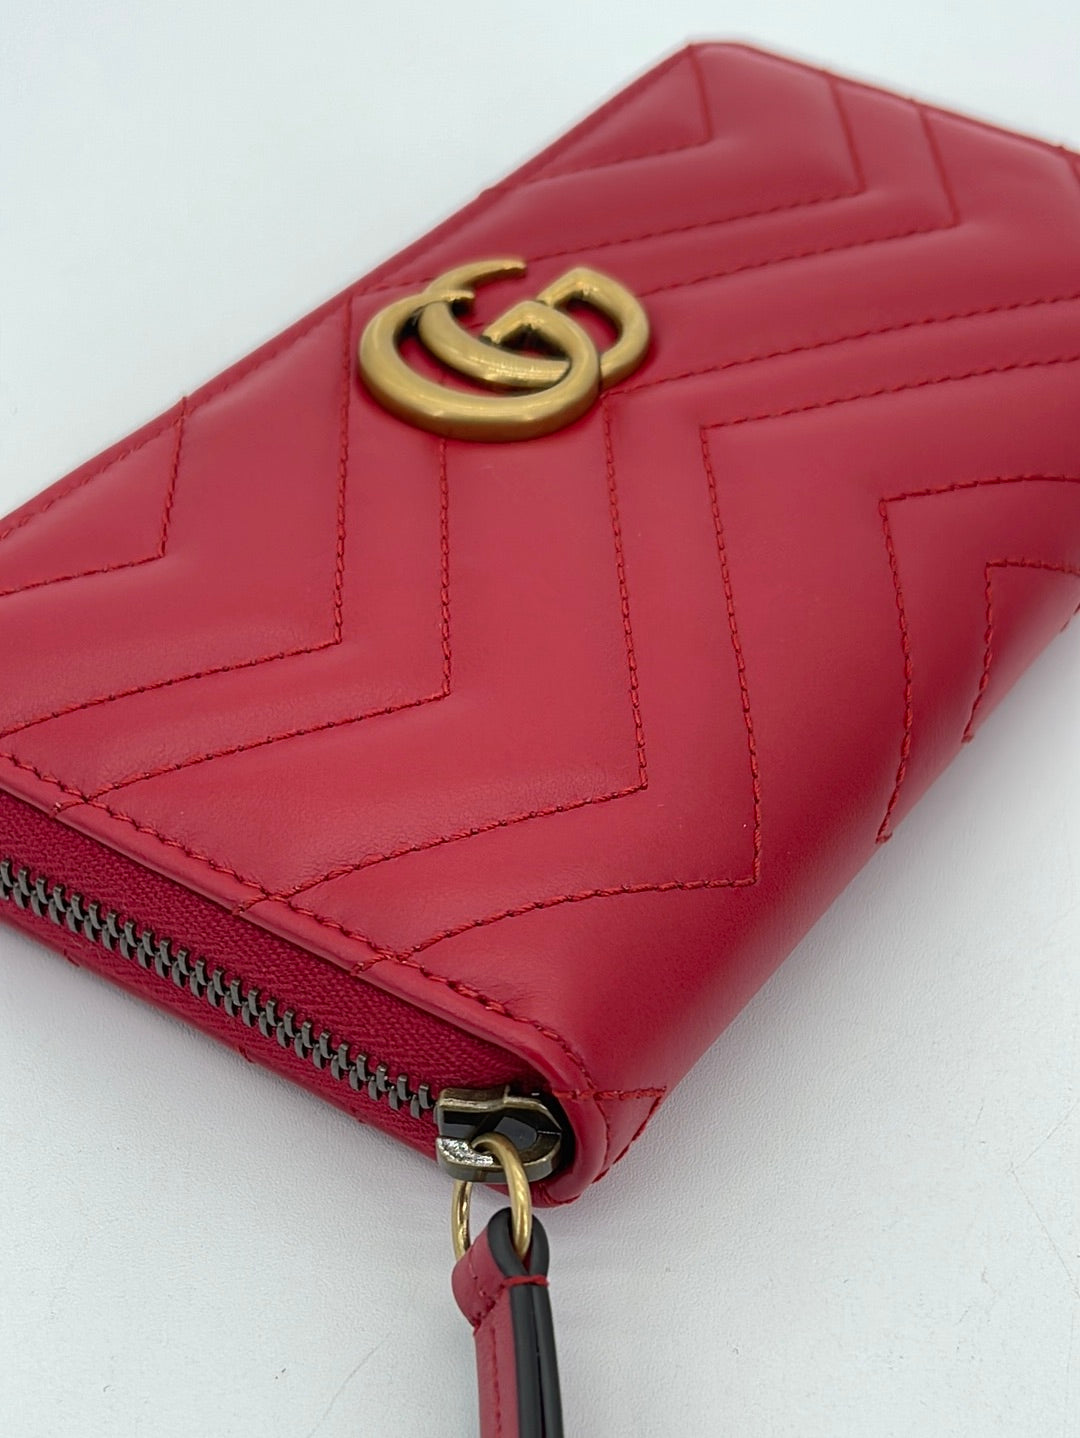 PRELOVED GUCCI Red Leather GG Zip Around Long Wallet 4431230959 (K) 020824